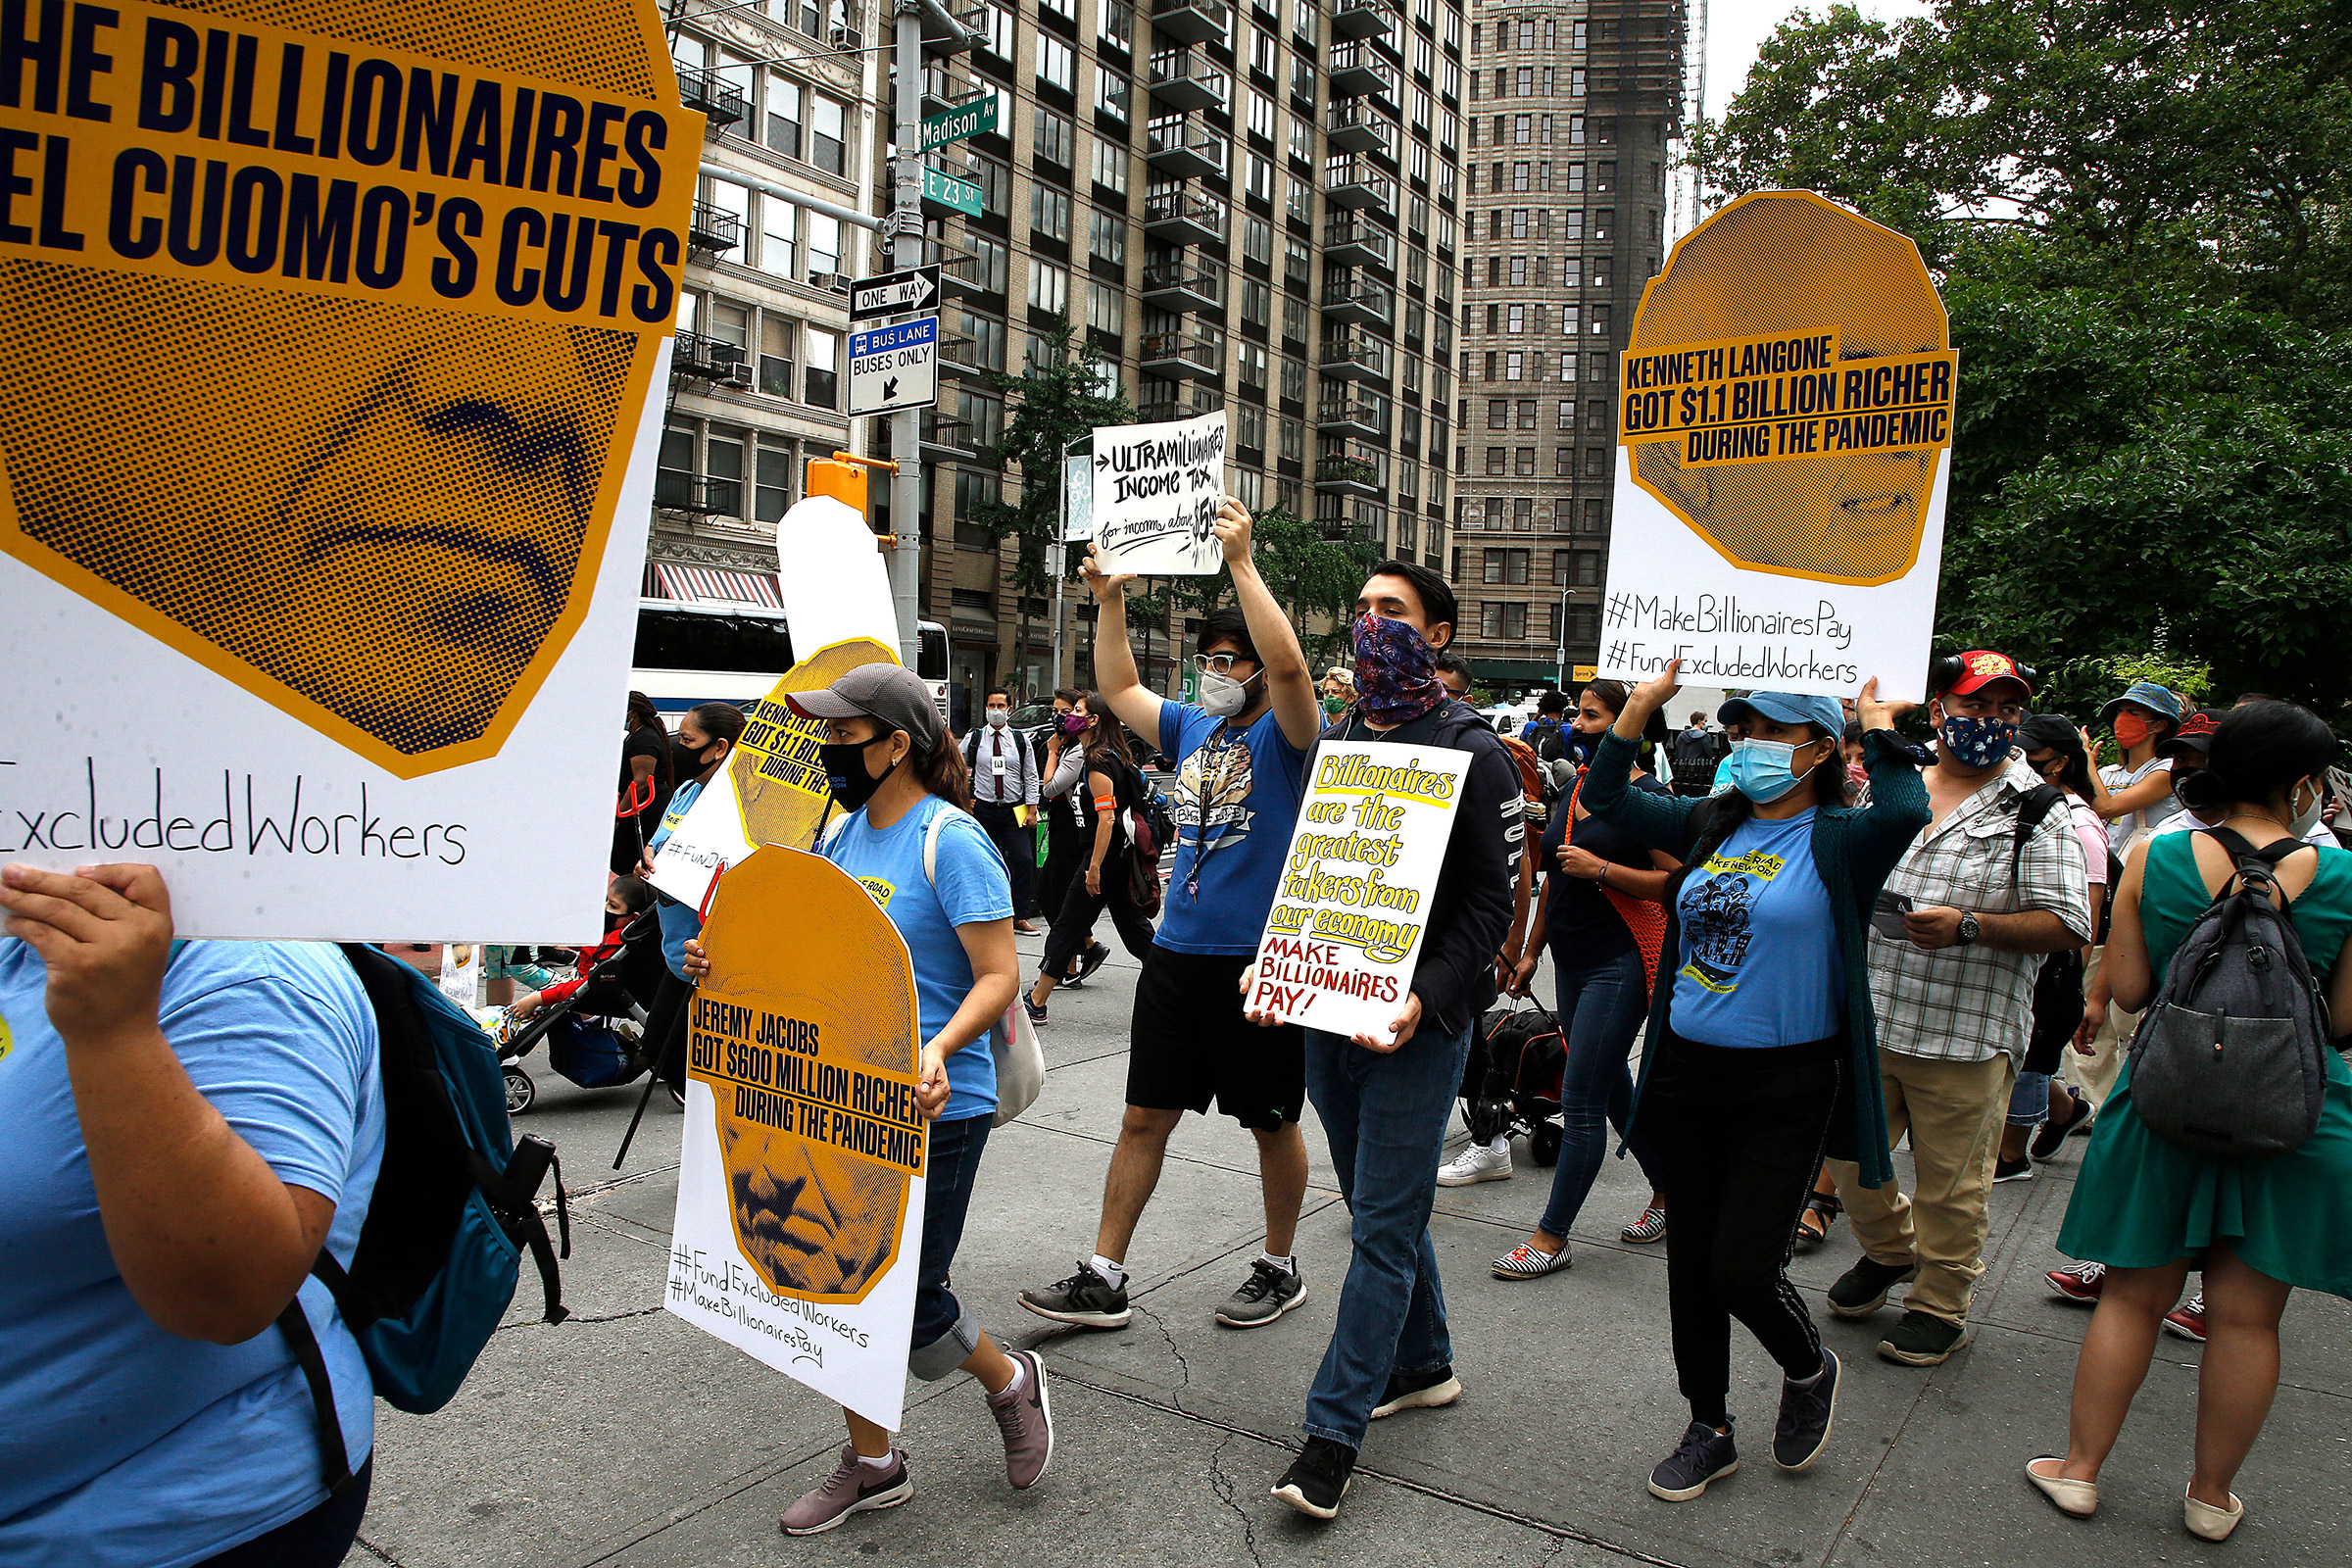 People demonstrate during the “March on Billionaires” to raise attention to the inequity in income among the wealthy and the working class in New York City on July 17, 2020. (John Laparski—Sipa USA)